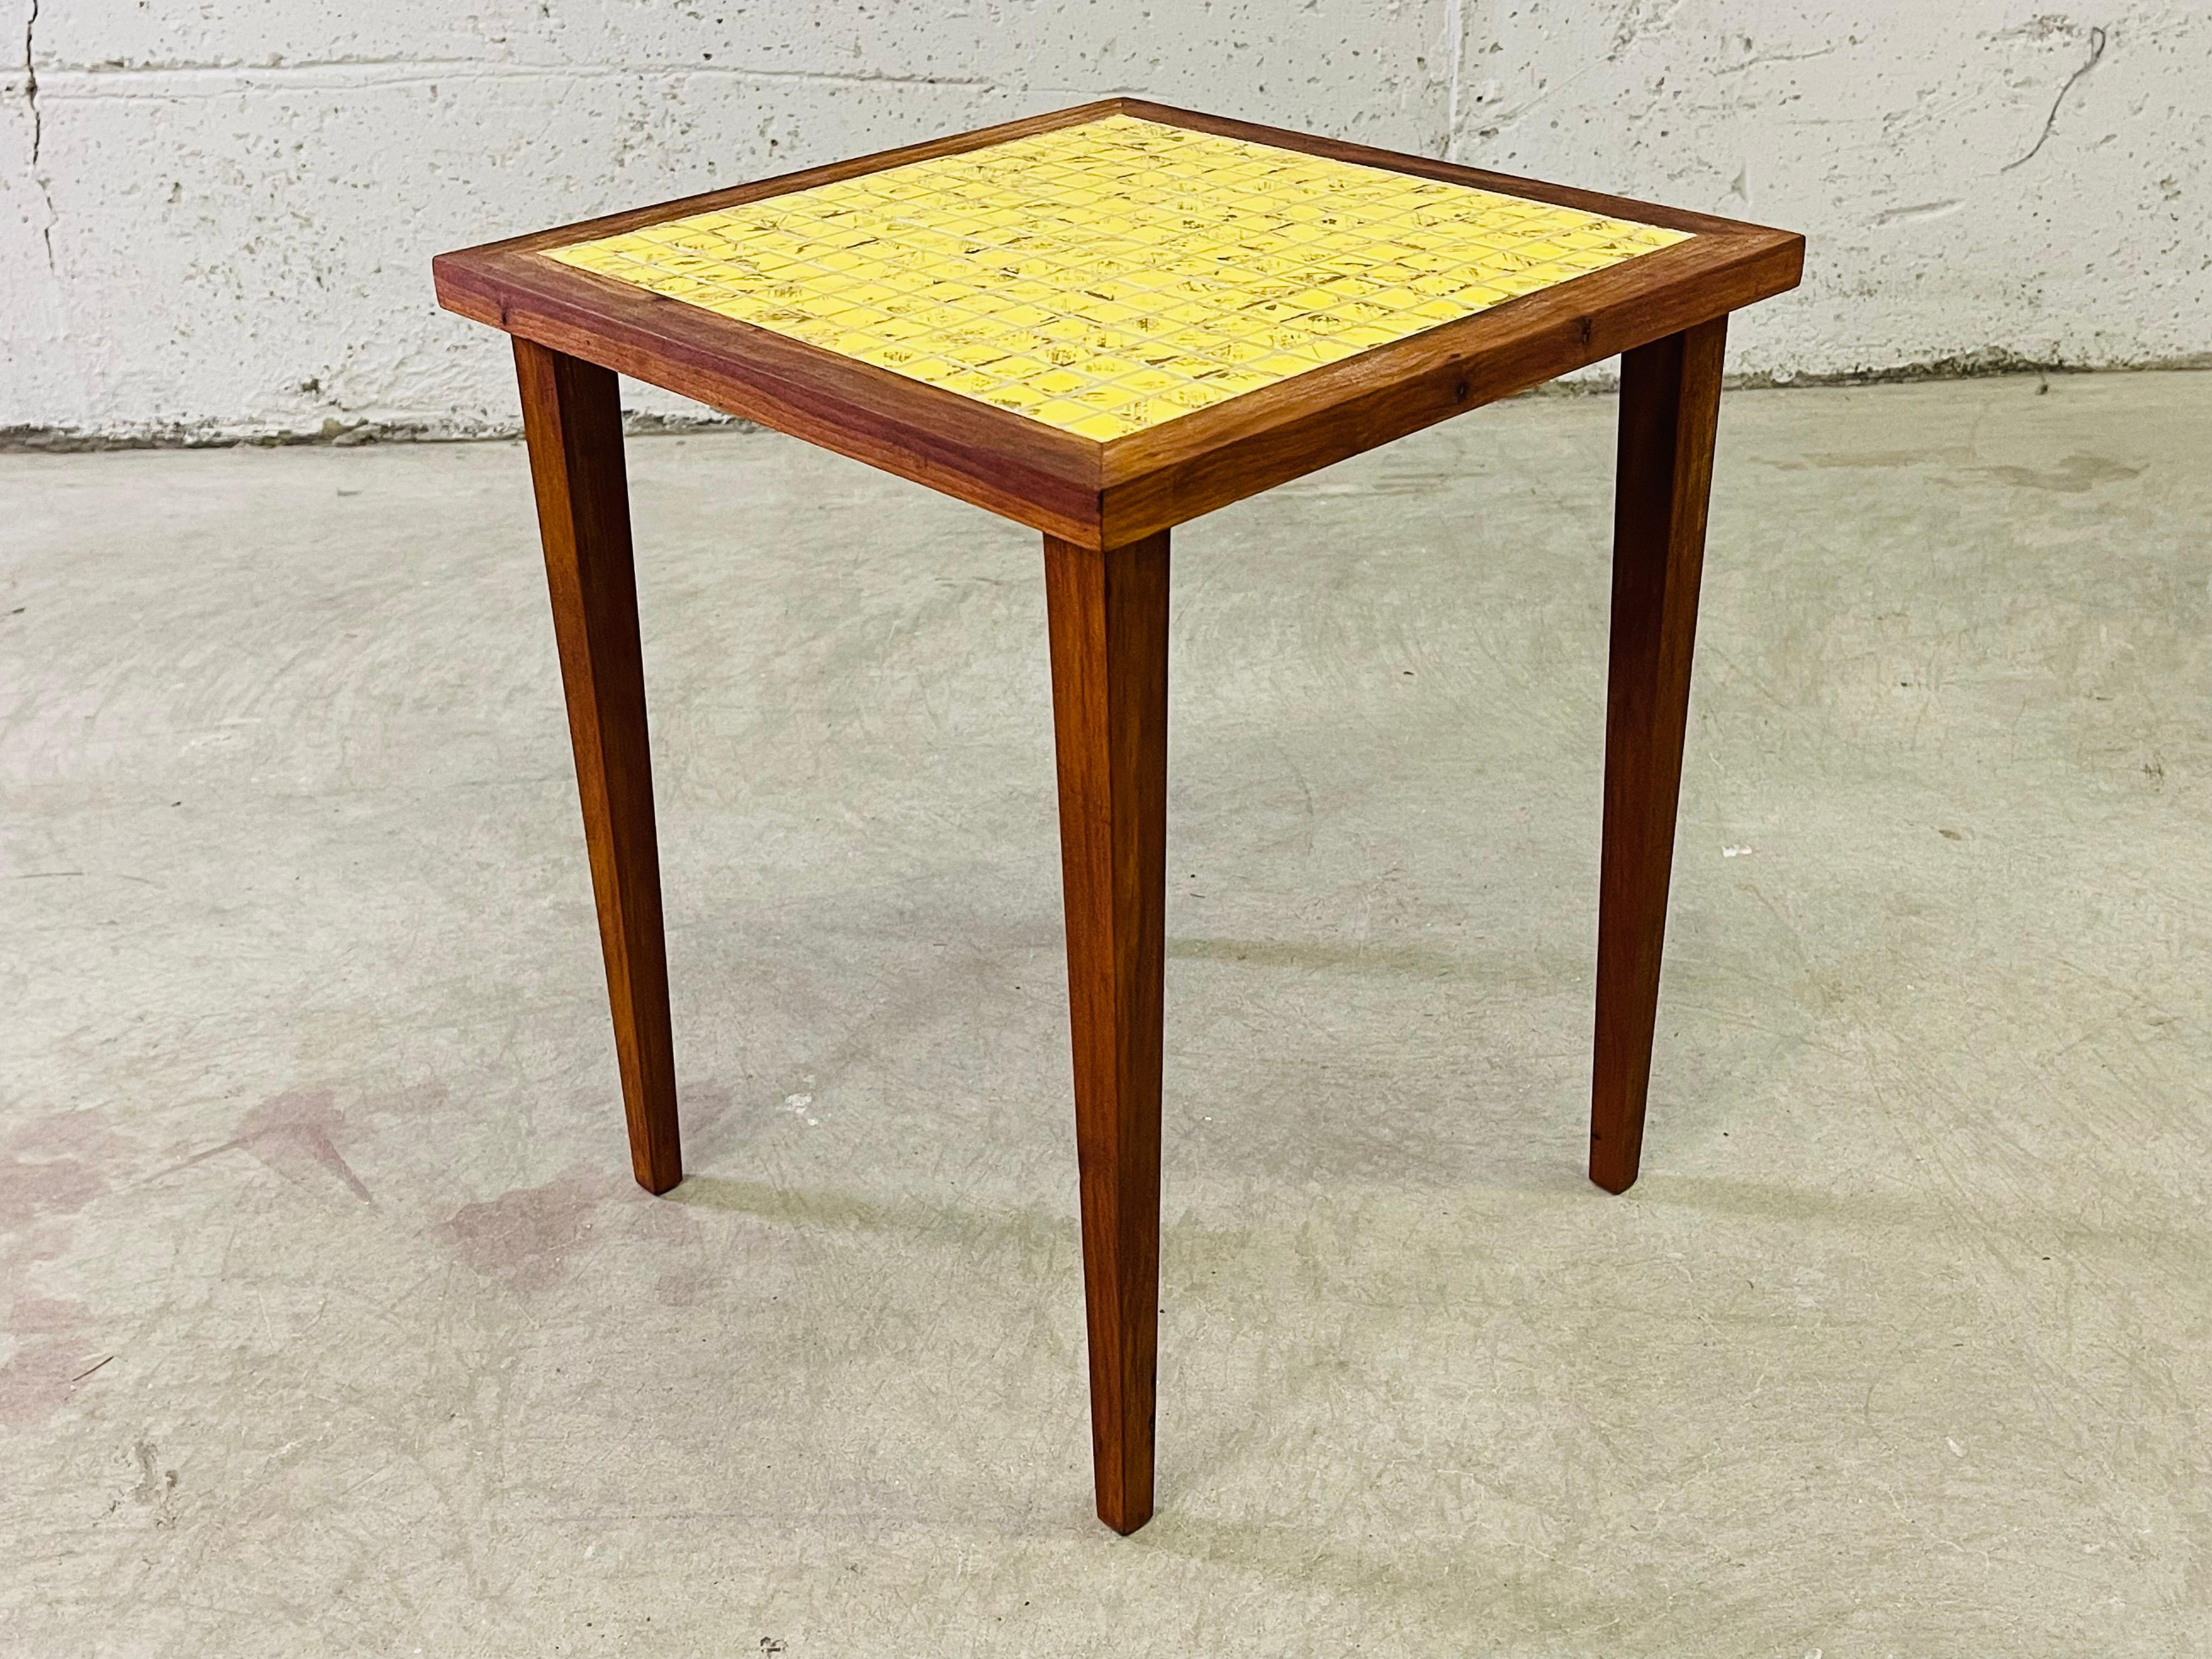 Vintage 1960s yellow and gold square tile top side table on a wood frame. No marks.